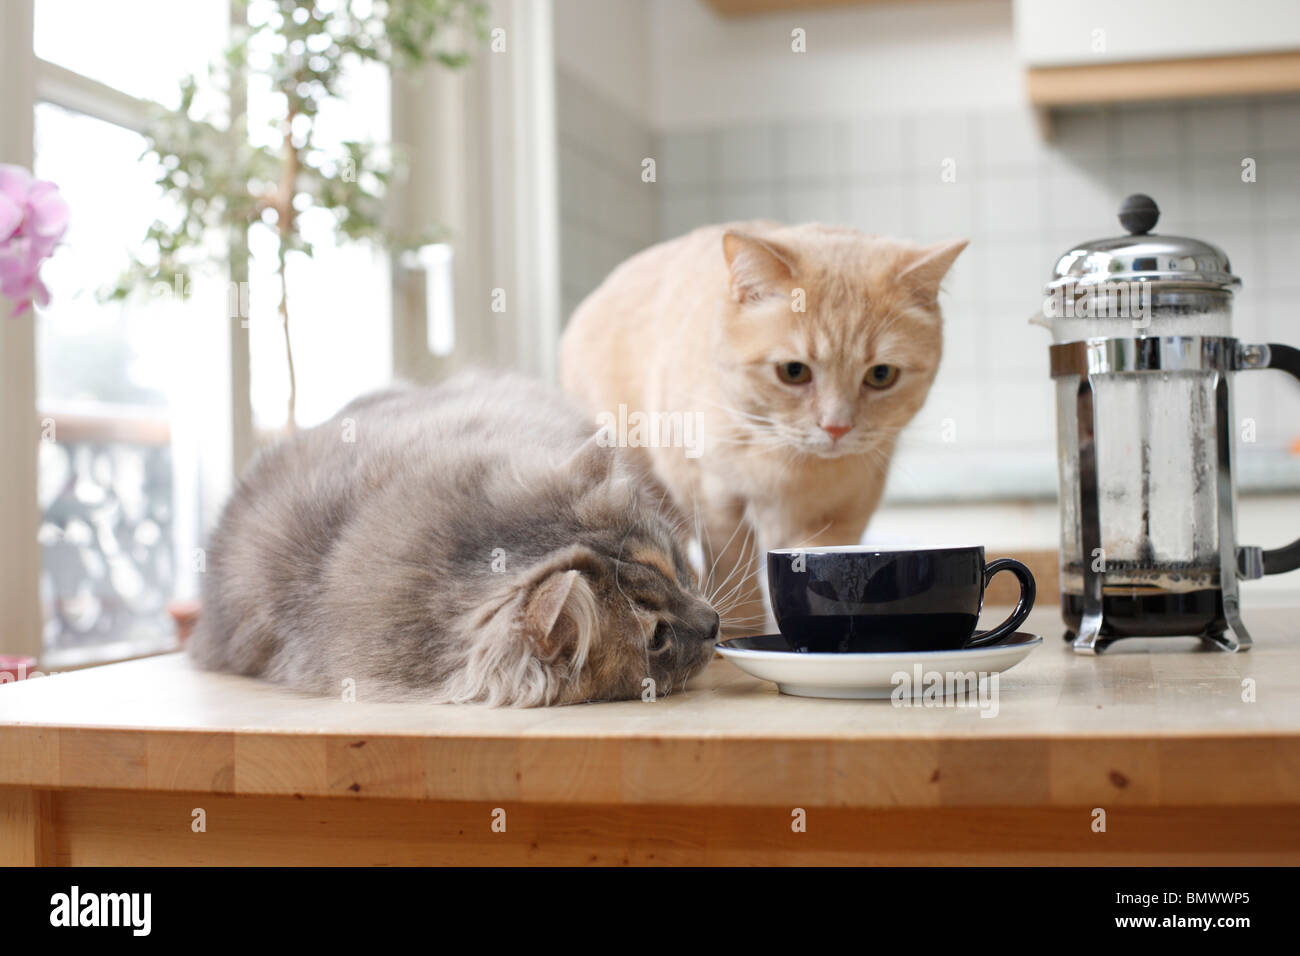 British Shorthair (Felis silvestris f. catus), two 2 years old cats sitting on a kitchen table watching a cup of coffee, Germany Stock Photo